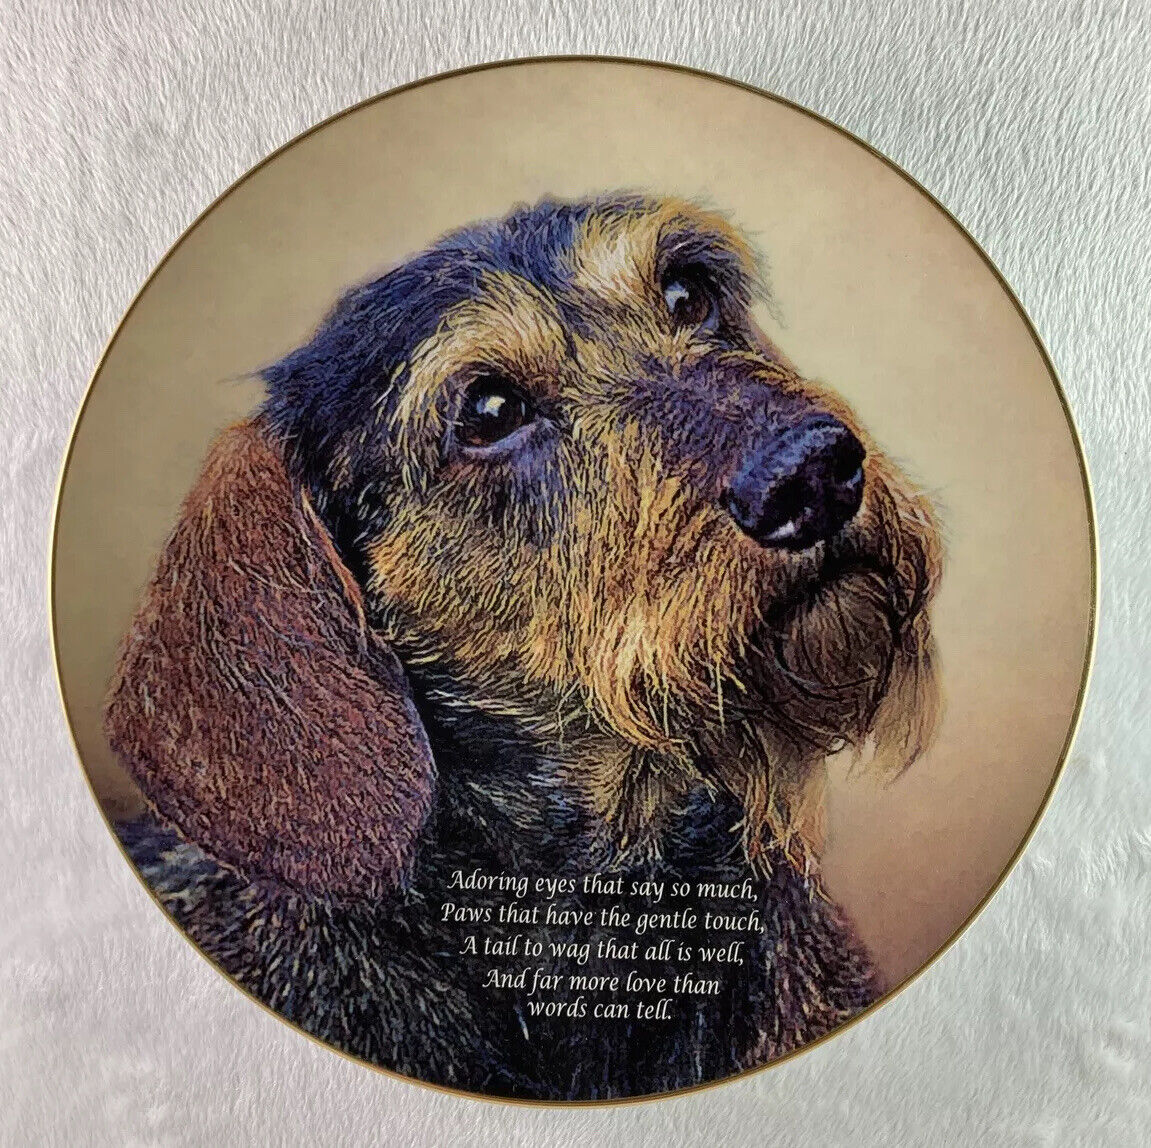 Cherished Dachshunds ADORING EYES Plate Danbury Paws That Have the Gentle Touch